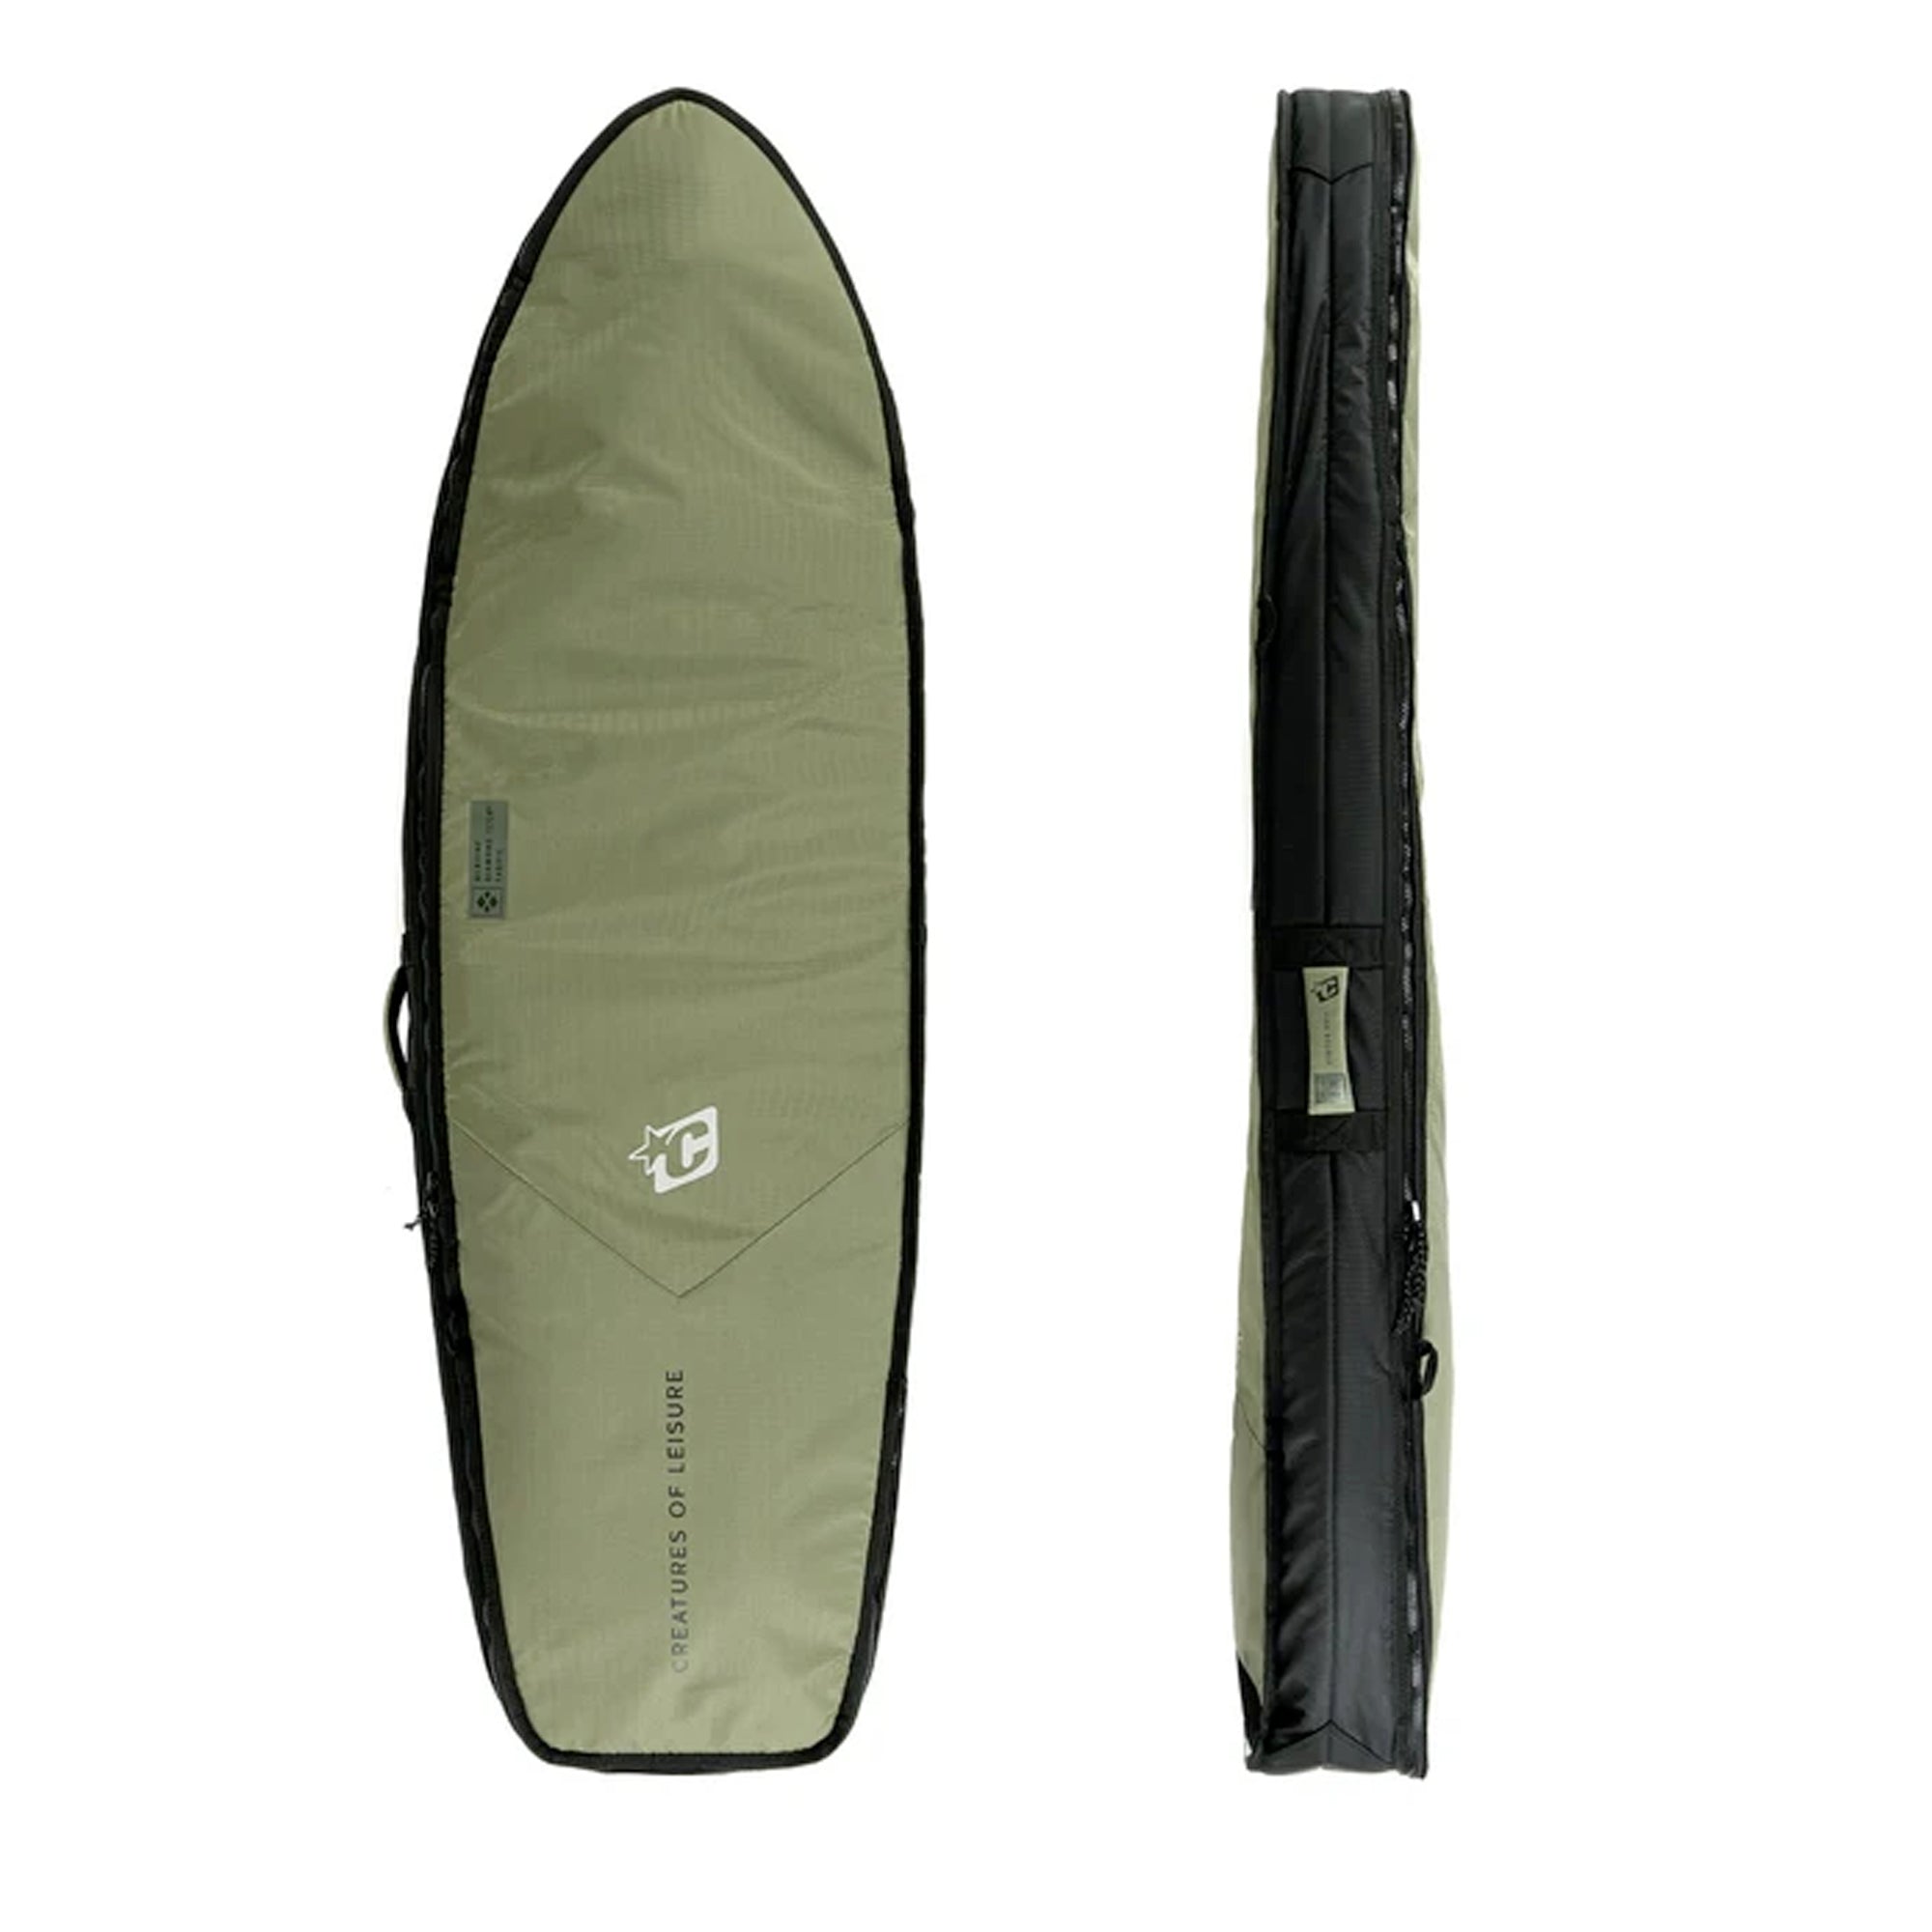 Creatures of Leisure 2021 Fish Double DT2.0 Surfboard Bag